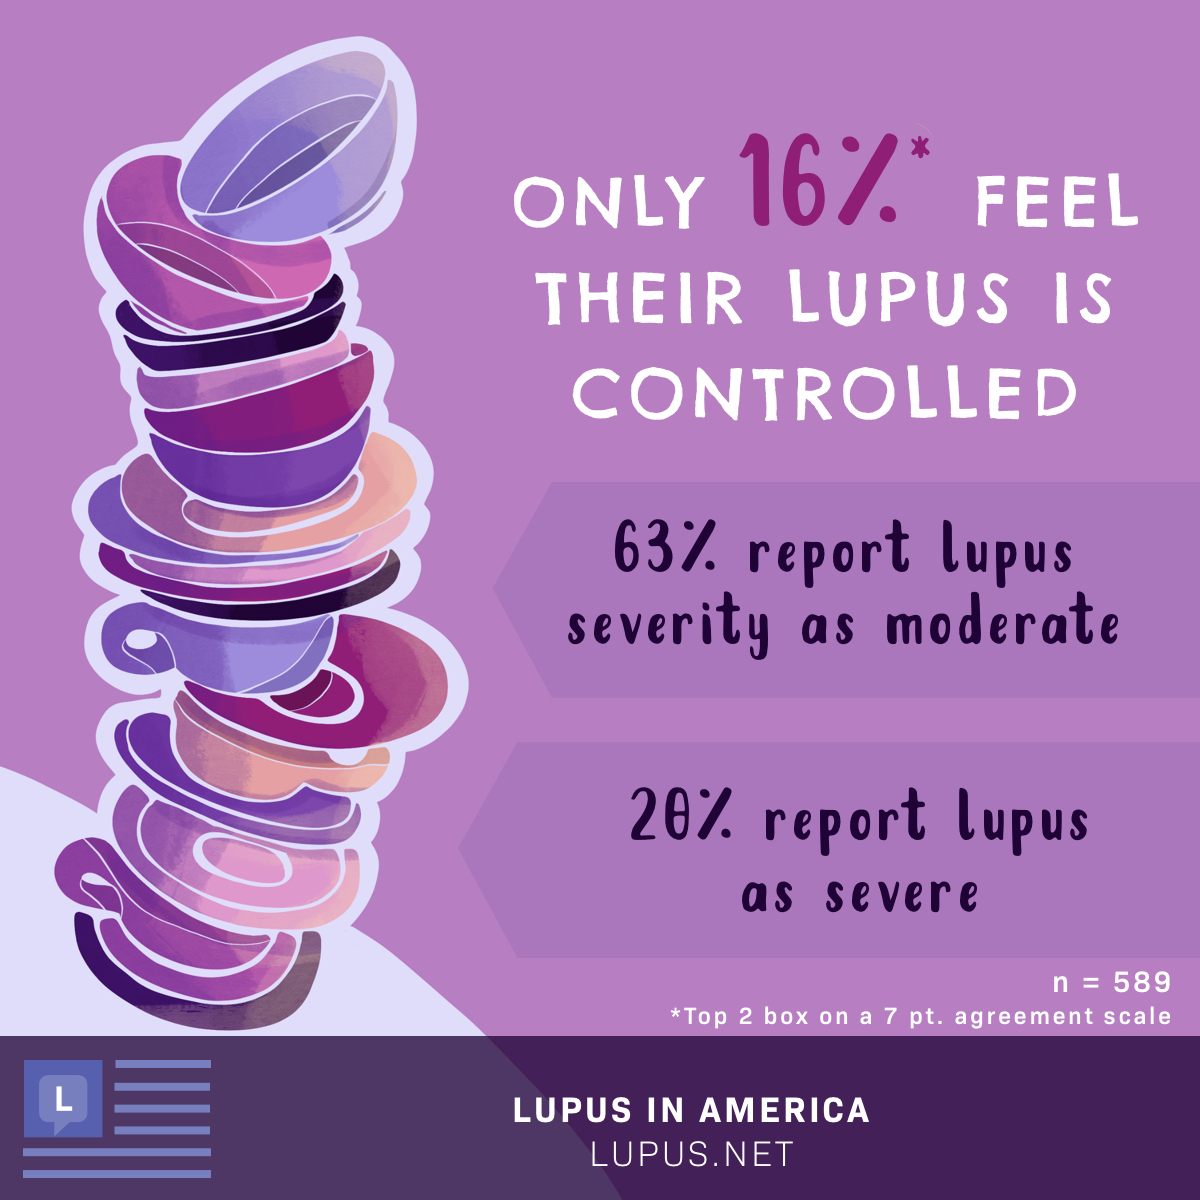 Only 16% of people with lupus feel their condition is controlled, 63% report their lupus severity as moderate, and 20% report it as severe. Imagery includes an unstable stack of teacups and plates balanced on the edge of a table.